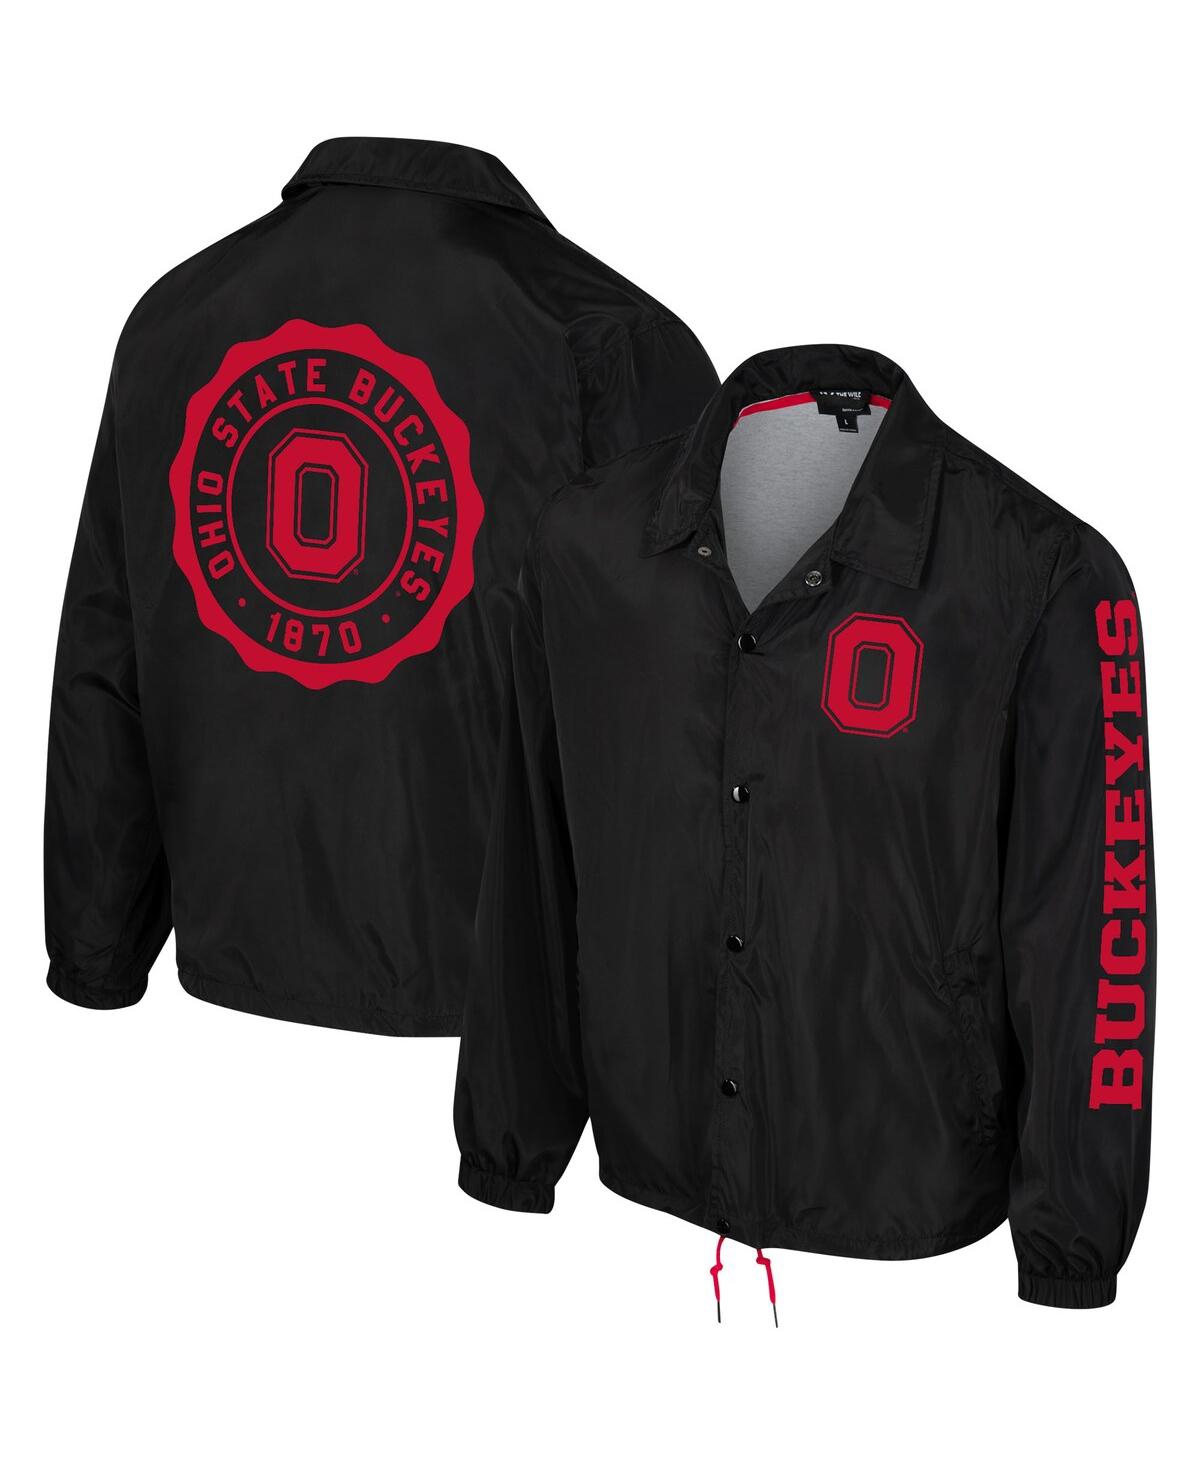 Men's and Women's The Wild Collective Black Ohio State Buckeyes Coaches Full-Snap Jacket - Black